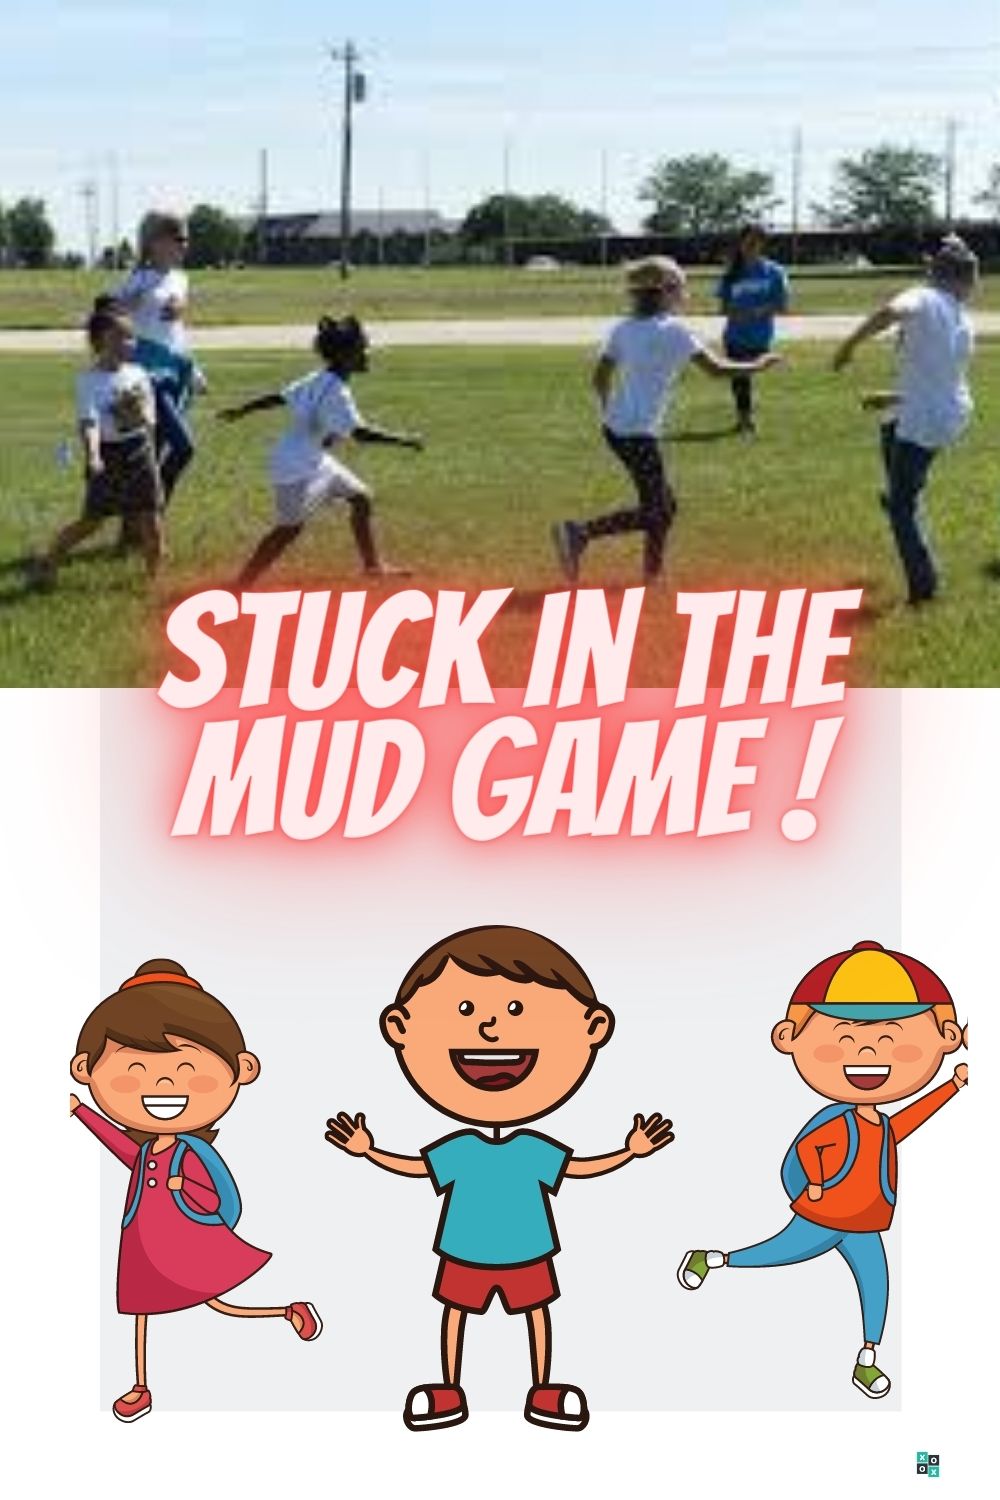 Stuck In The Mud Game Rules And How To Play